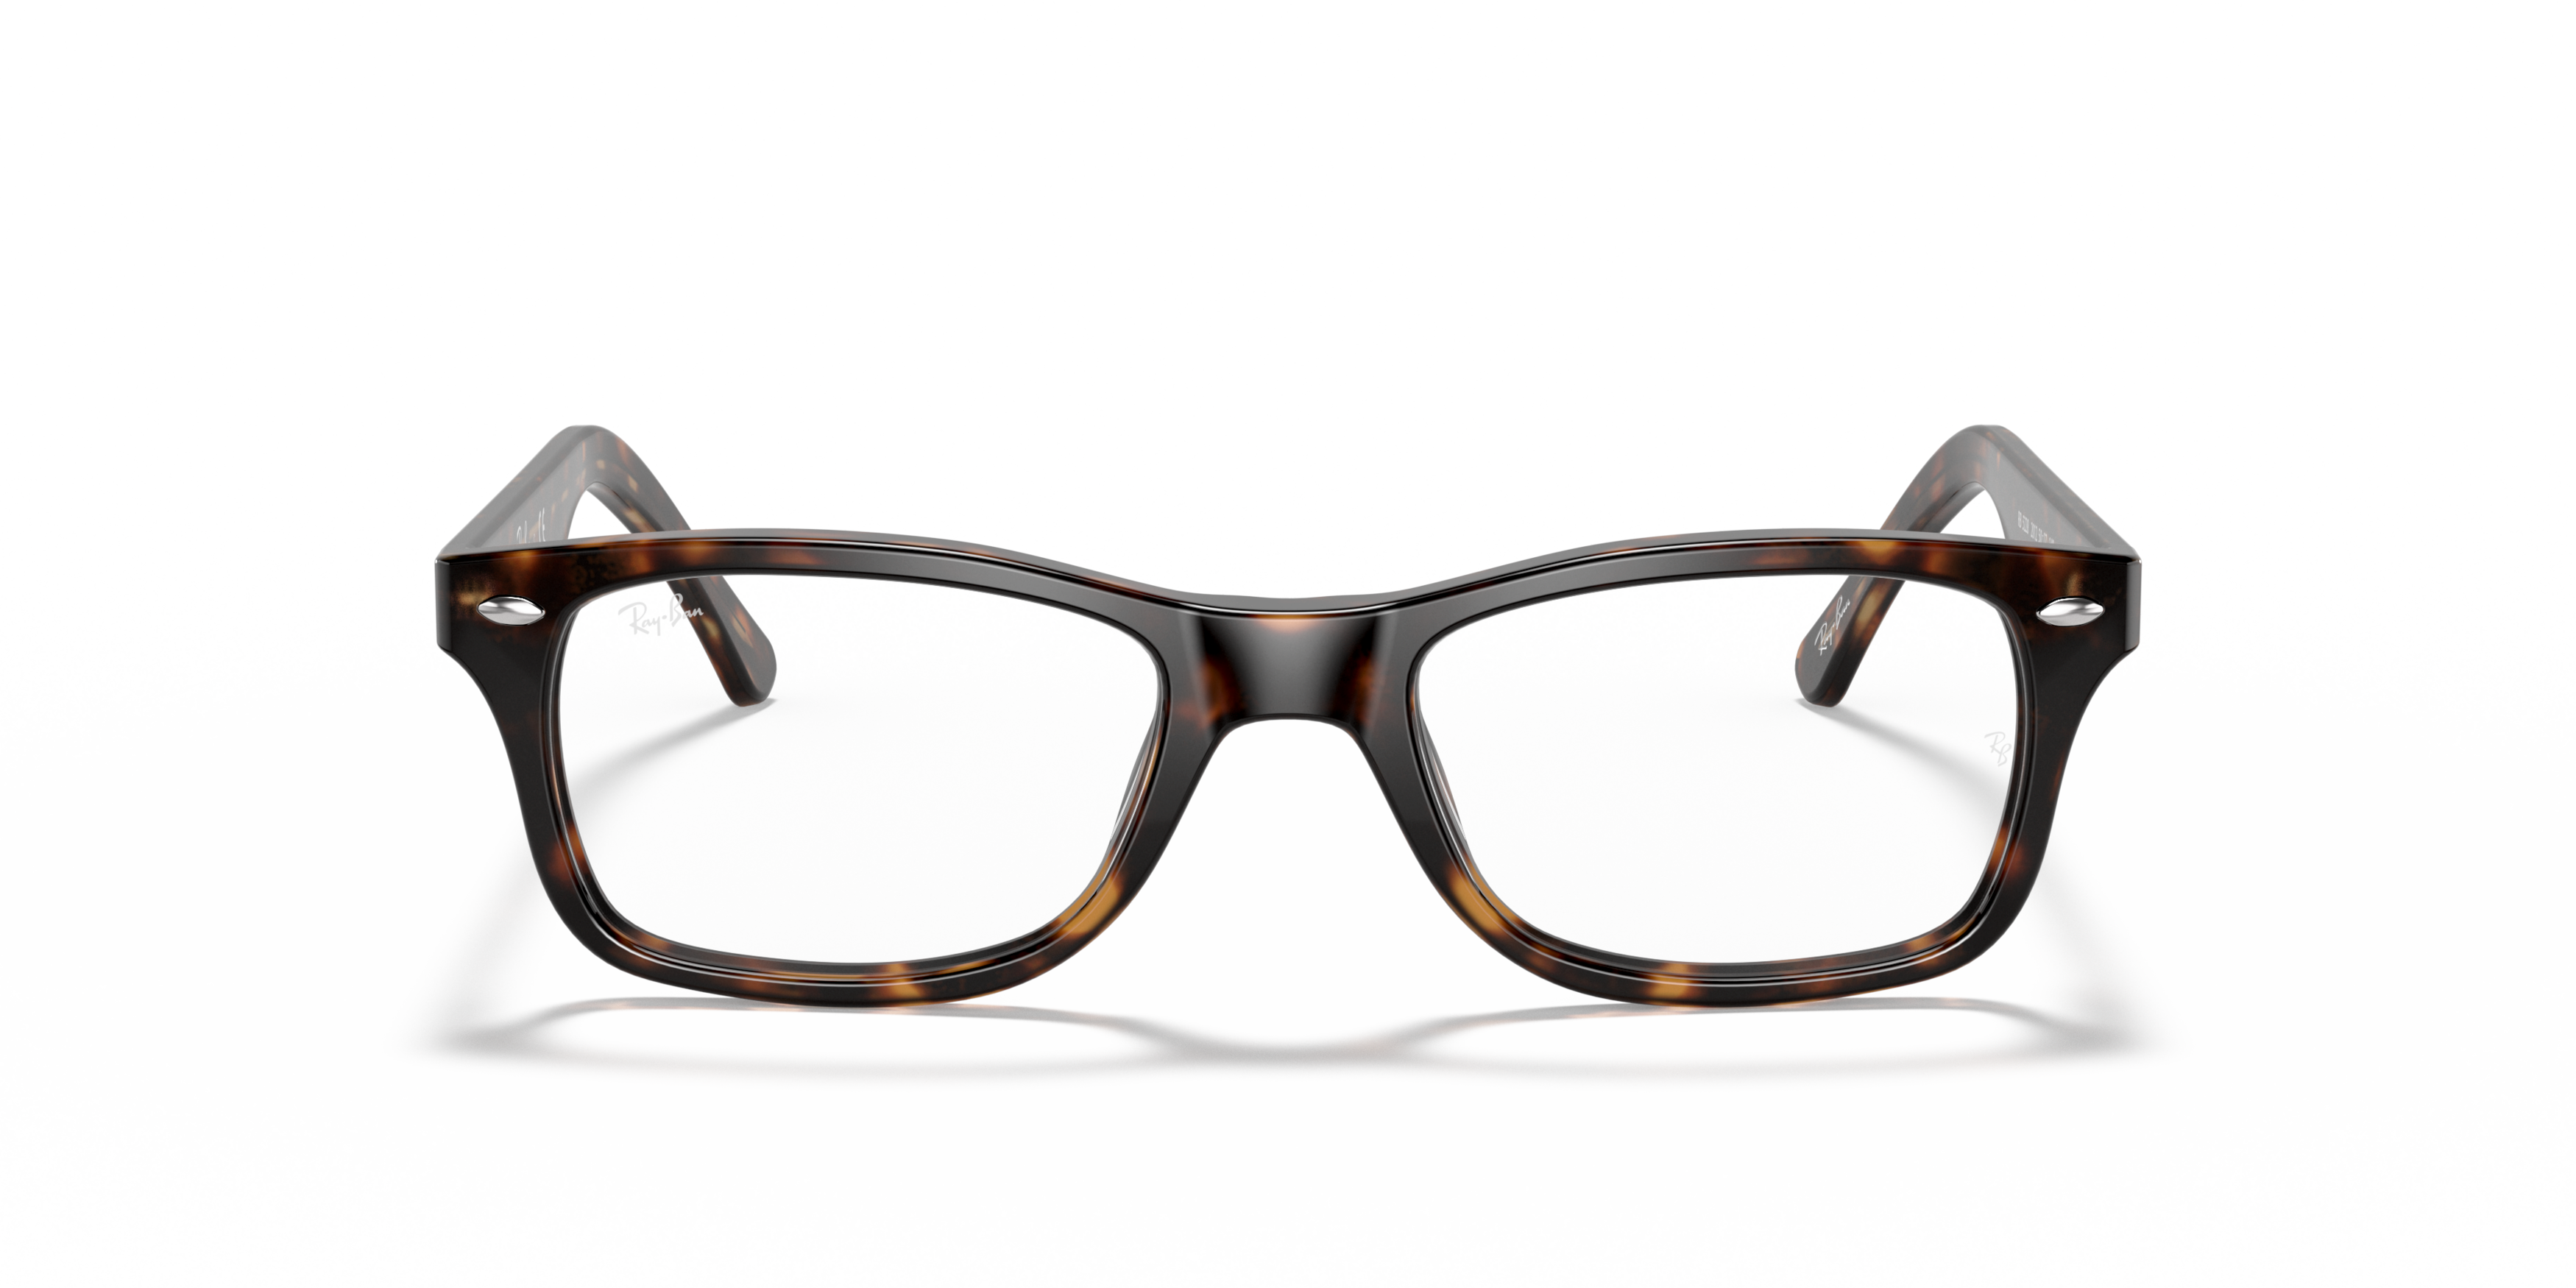 Front Ray-Ban RX 5228 Glasses Transparent / Tortoise Shell